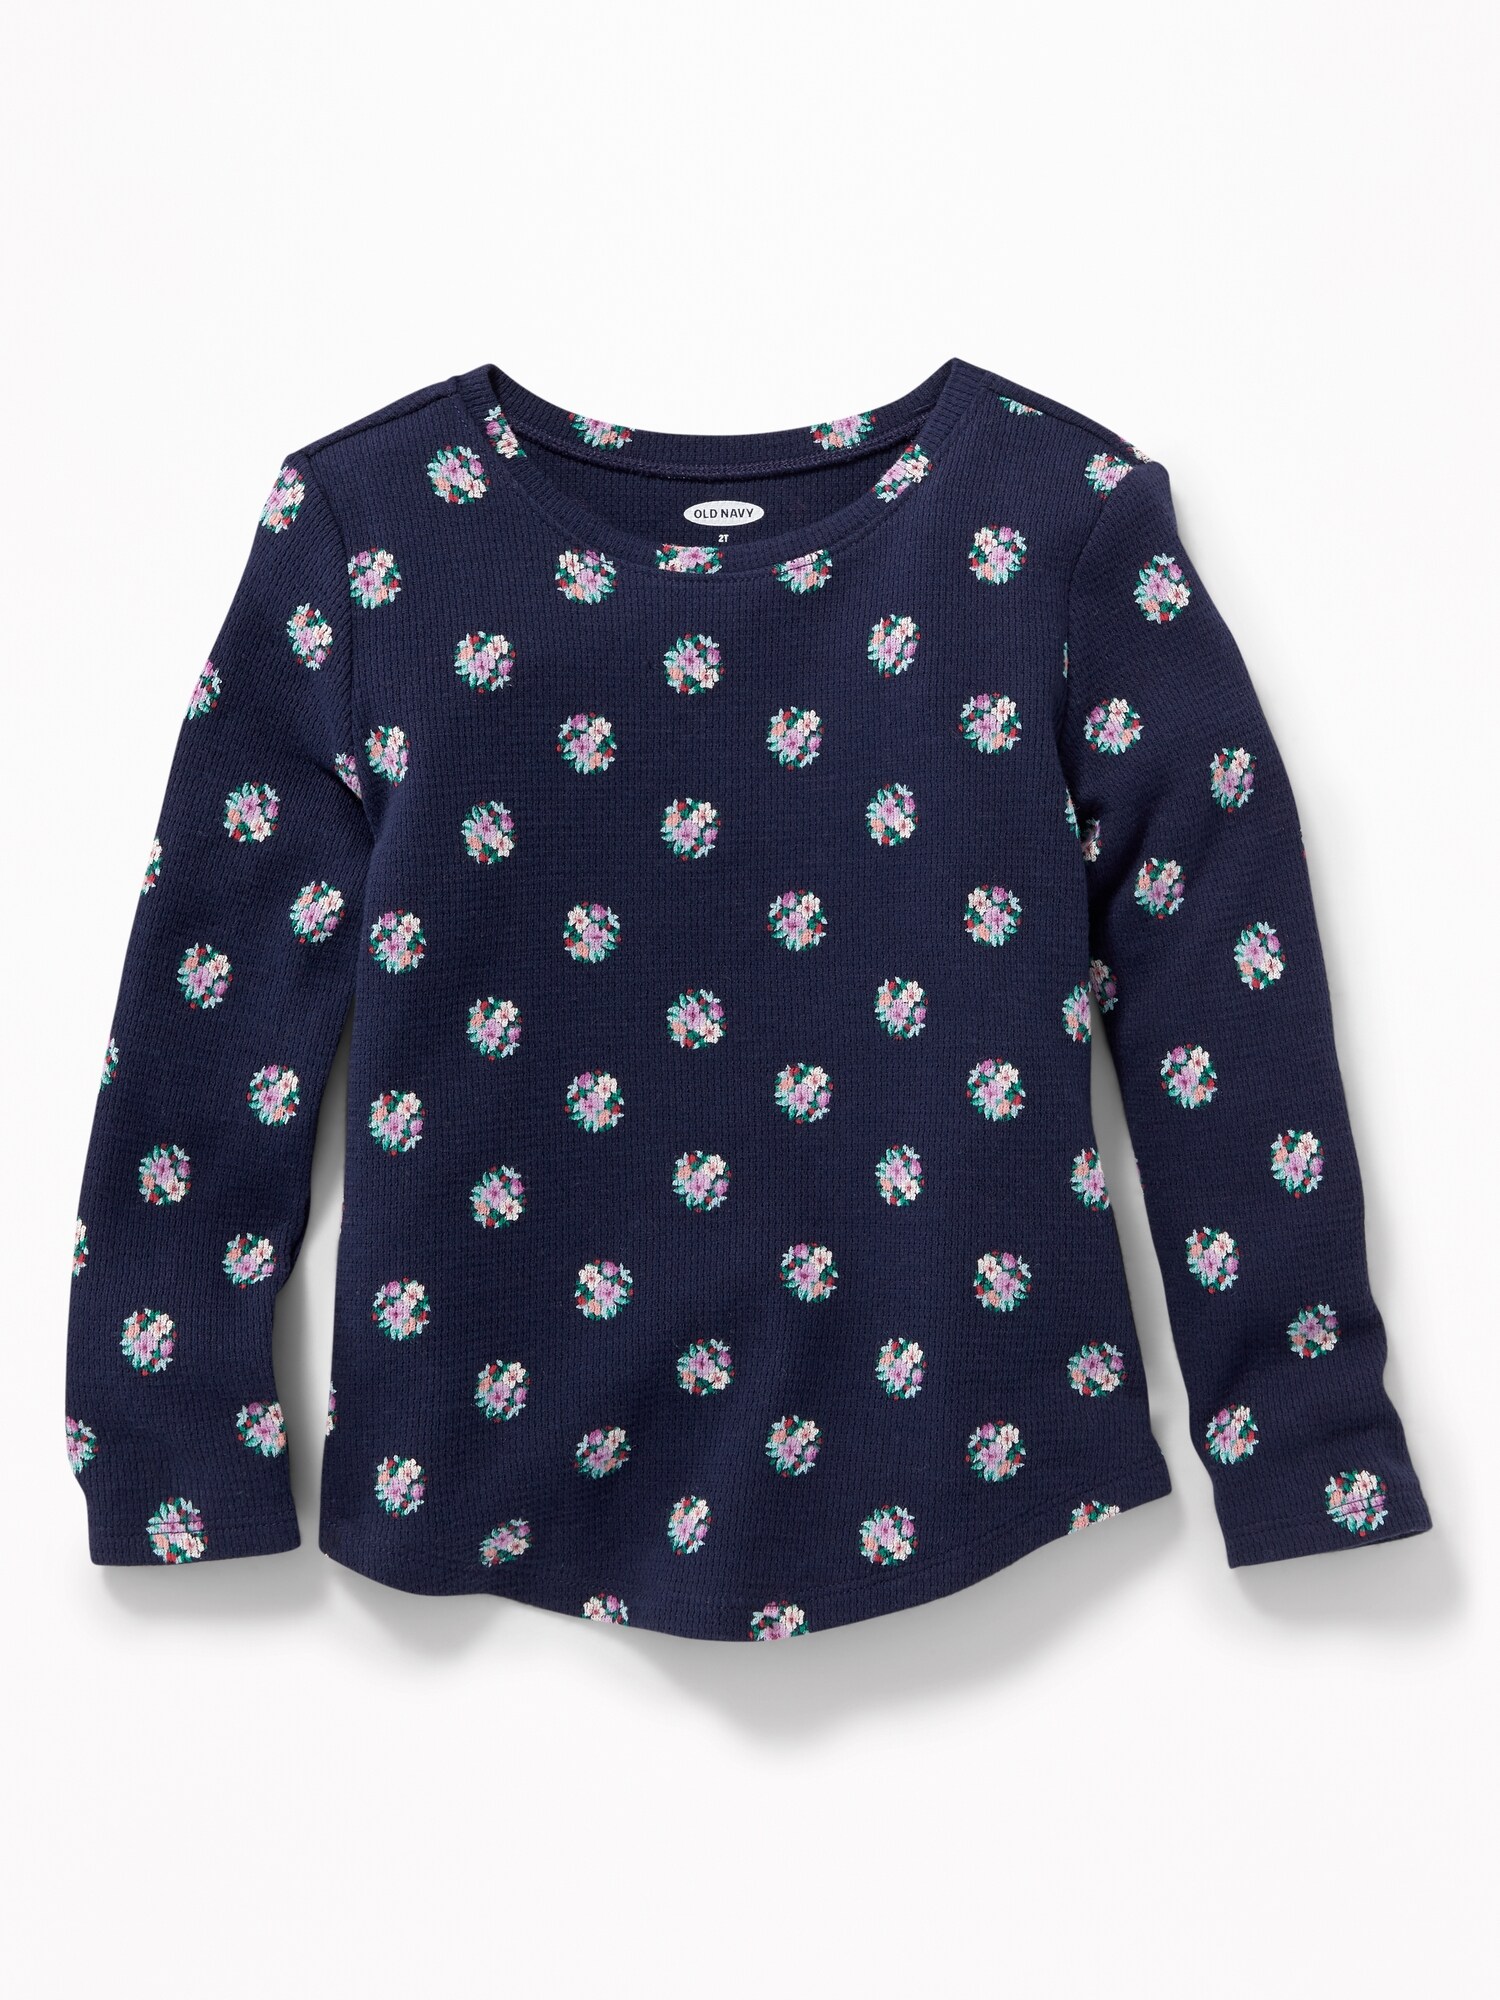 Printed Thermal-Knit Tee for Toddler Girls | Old Navy